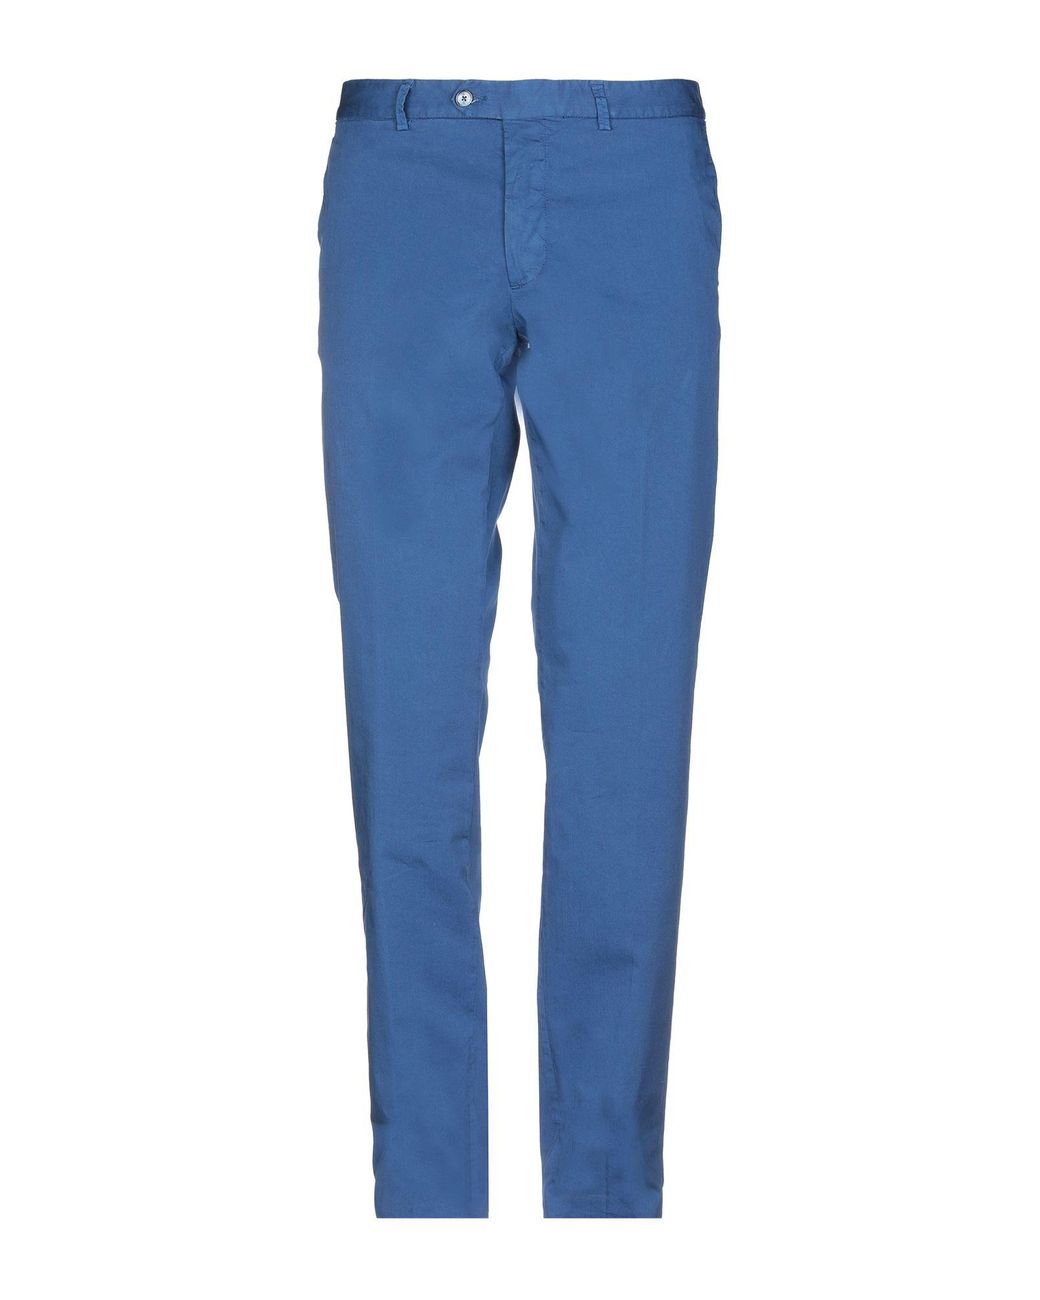 Roda Cotton Casual Trouser in Blue for Men - Lyst